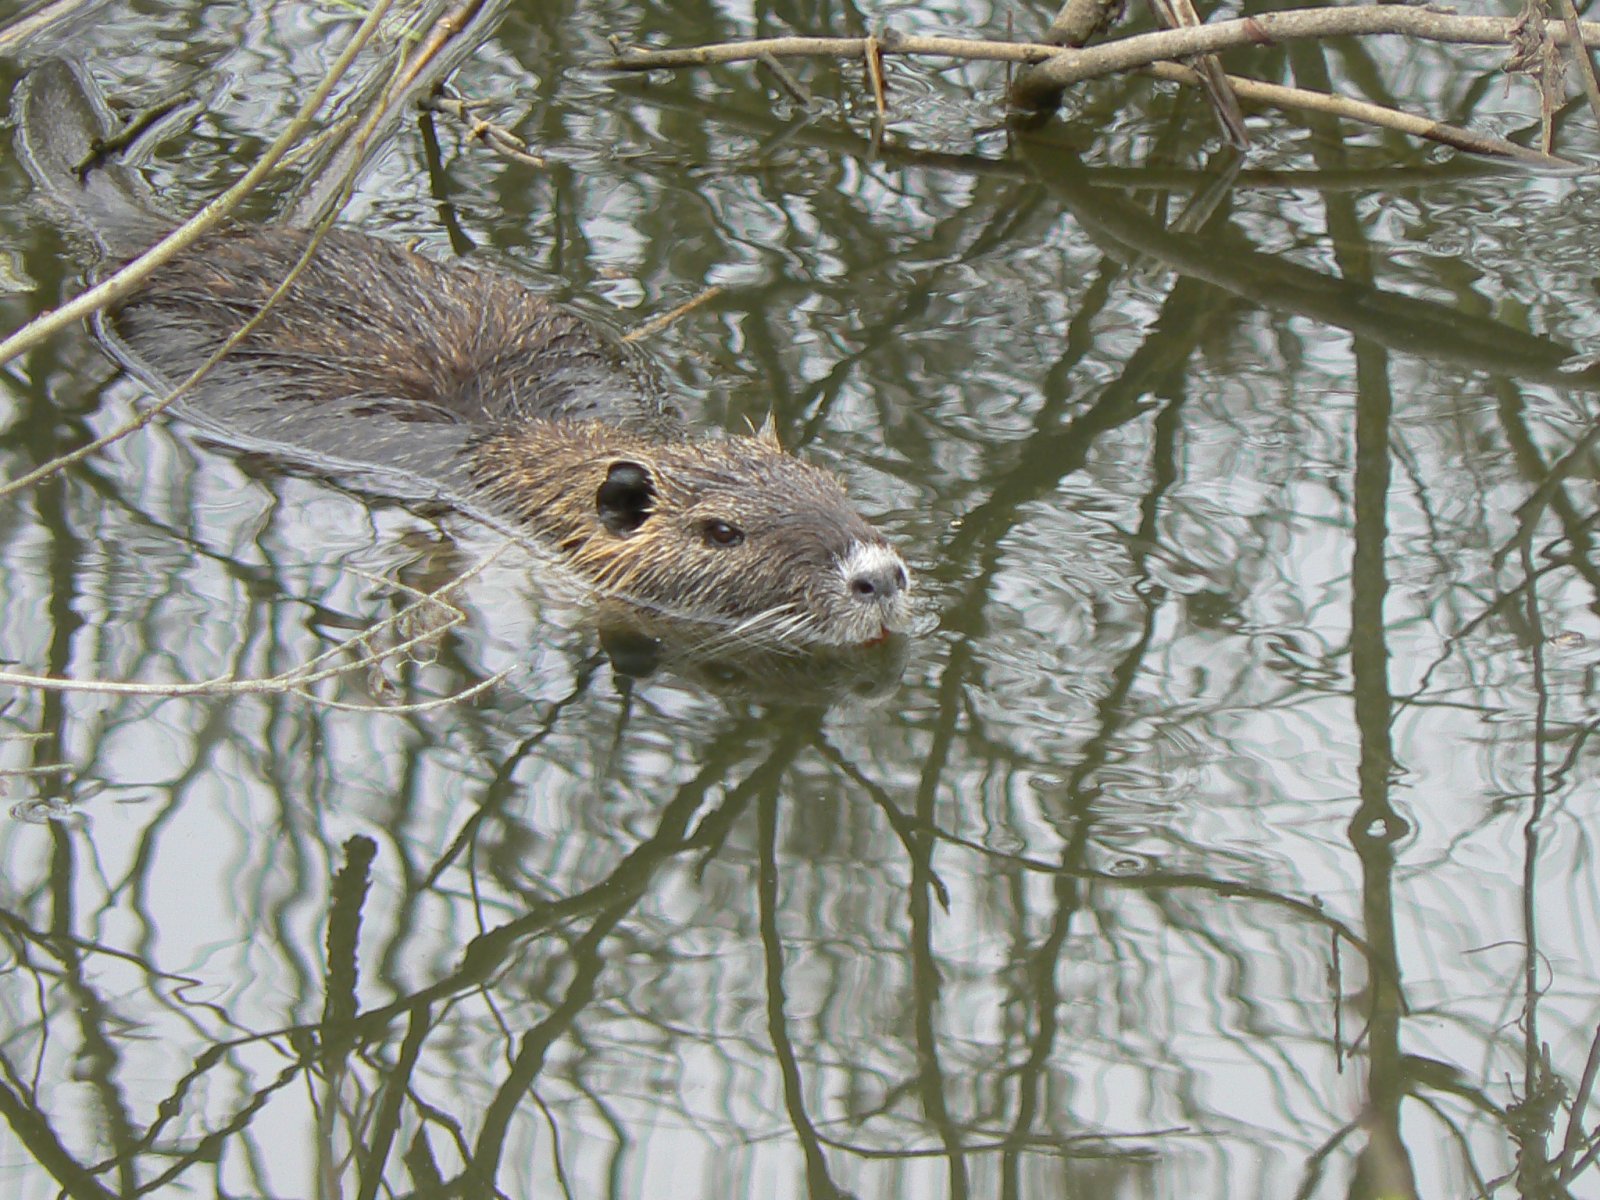 a beaver swimming in water with trees reflected in the water